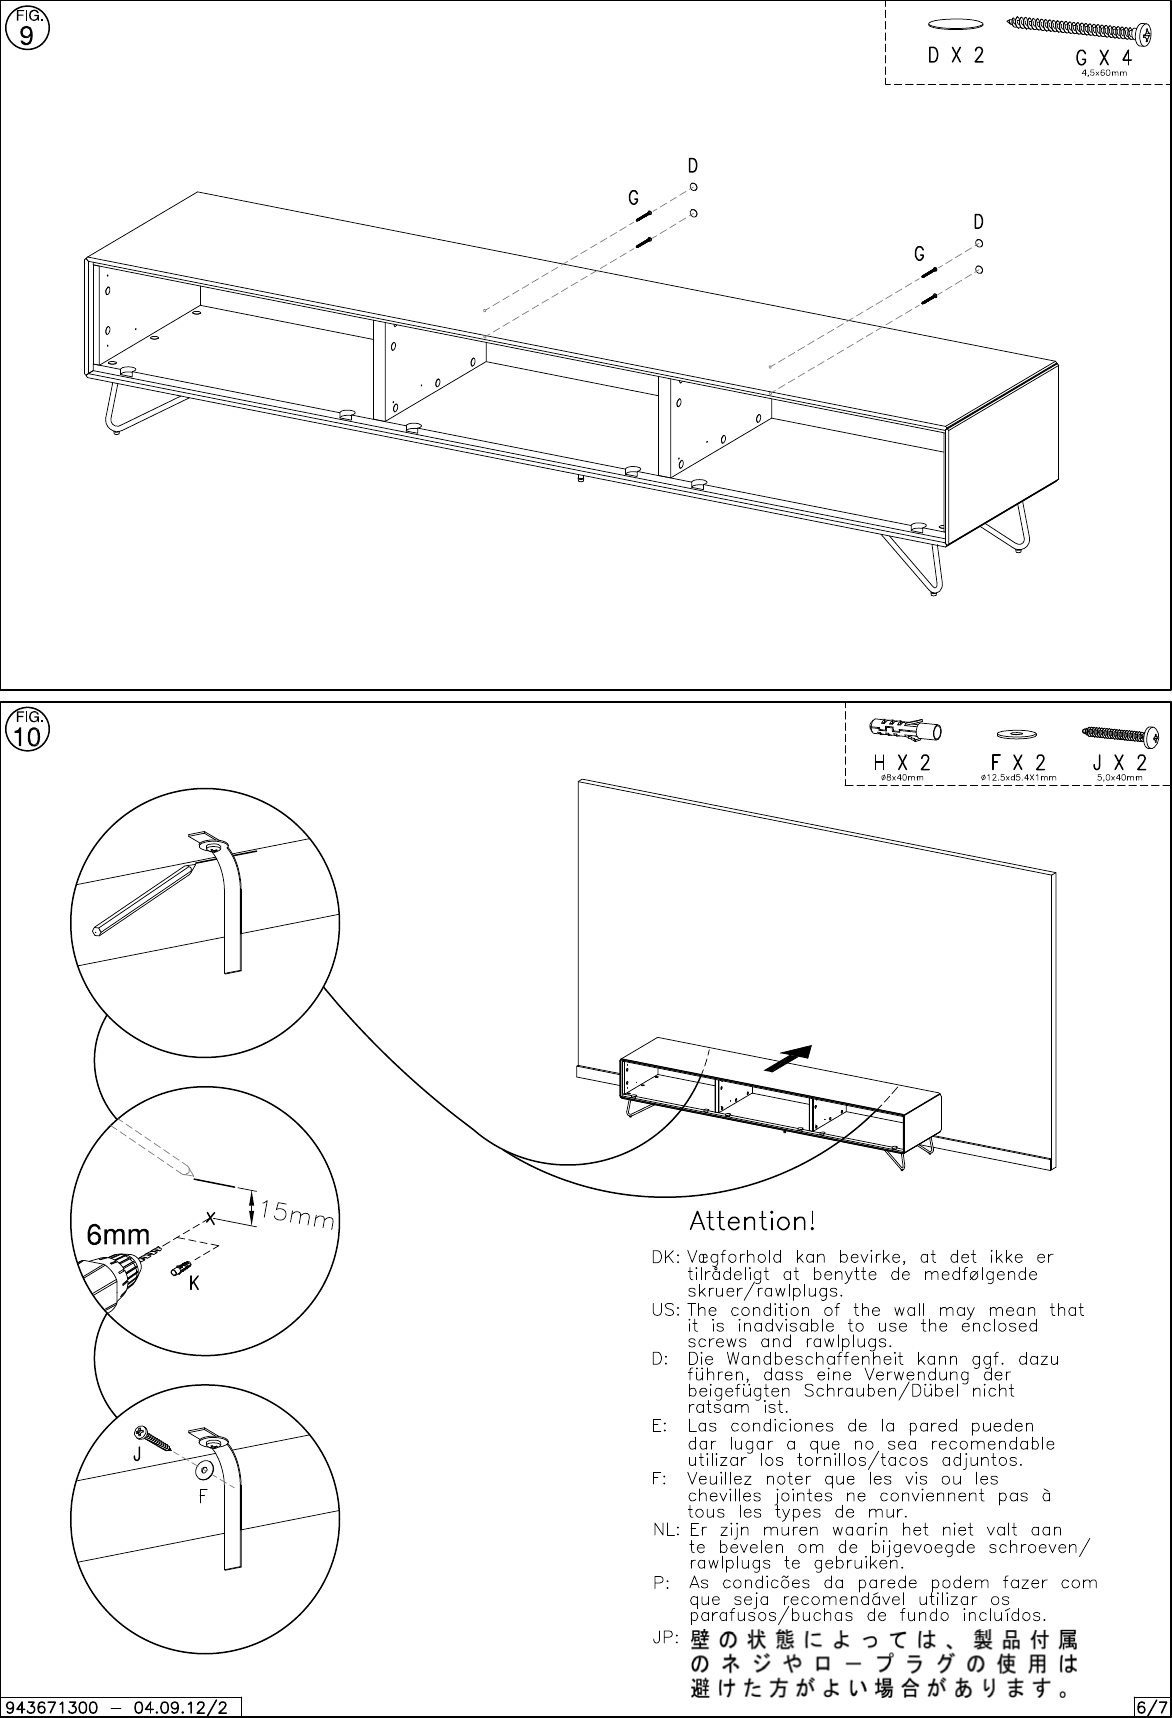 Page 6 of 7 - Boconcept Boconcept--1300-Assembly-Instruction C:\BC Working\Designs\BC Standard Products\367 Fermo\Fermo 1300\Assembly Instruction\943671300_v1_05